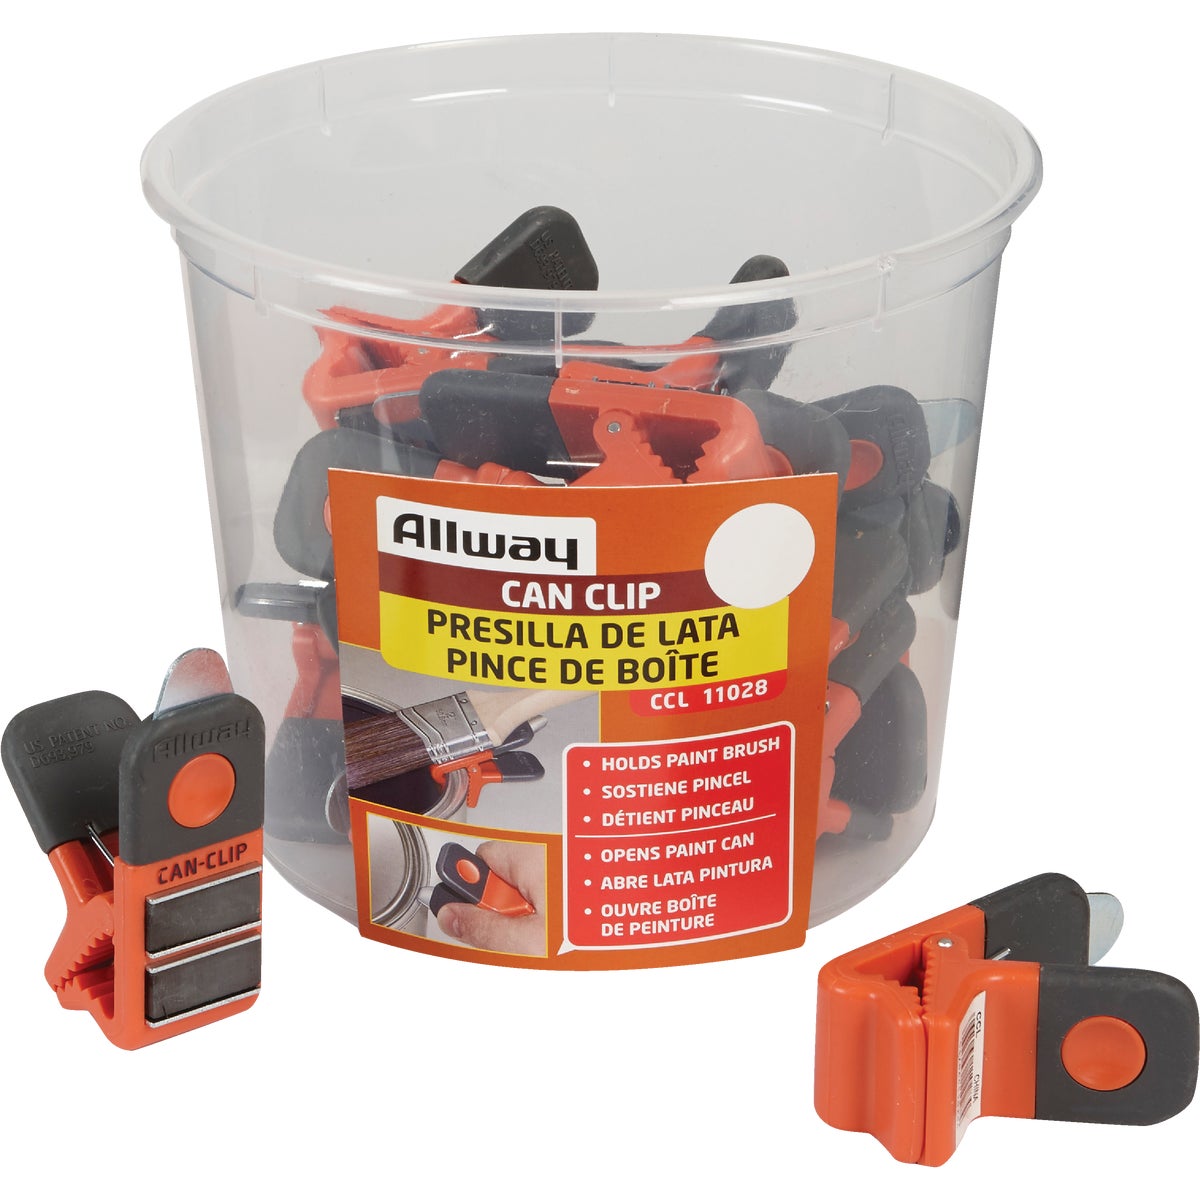 Item 772087, The magnetic can clip attaches to the side of 1-gallon paint cans to 